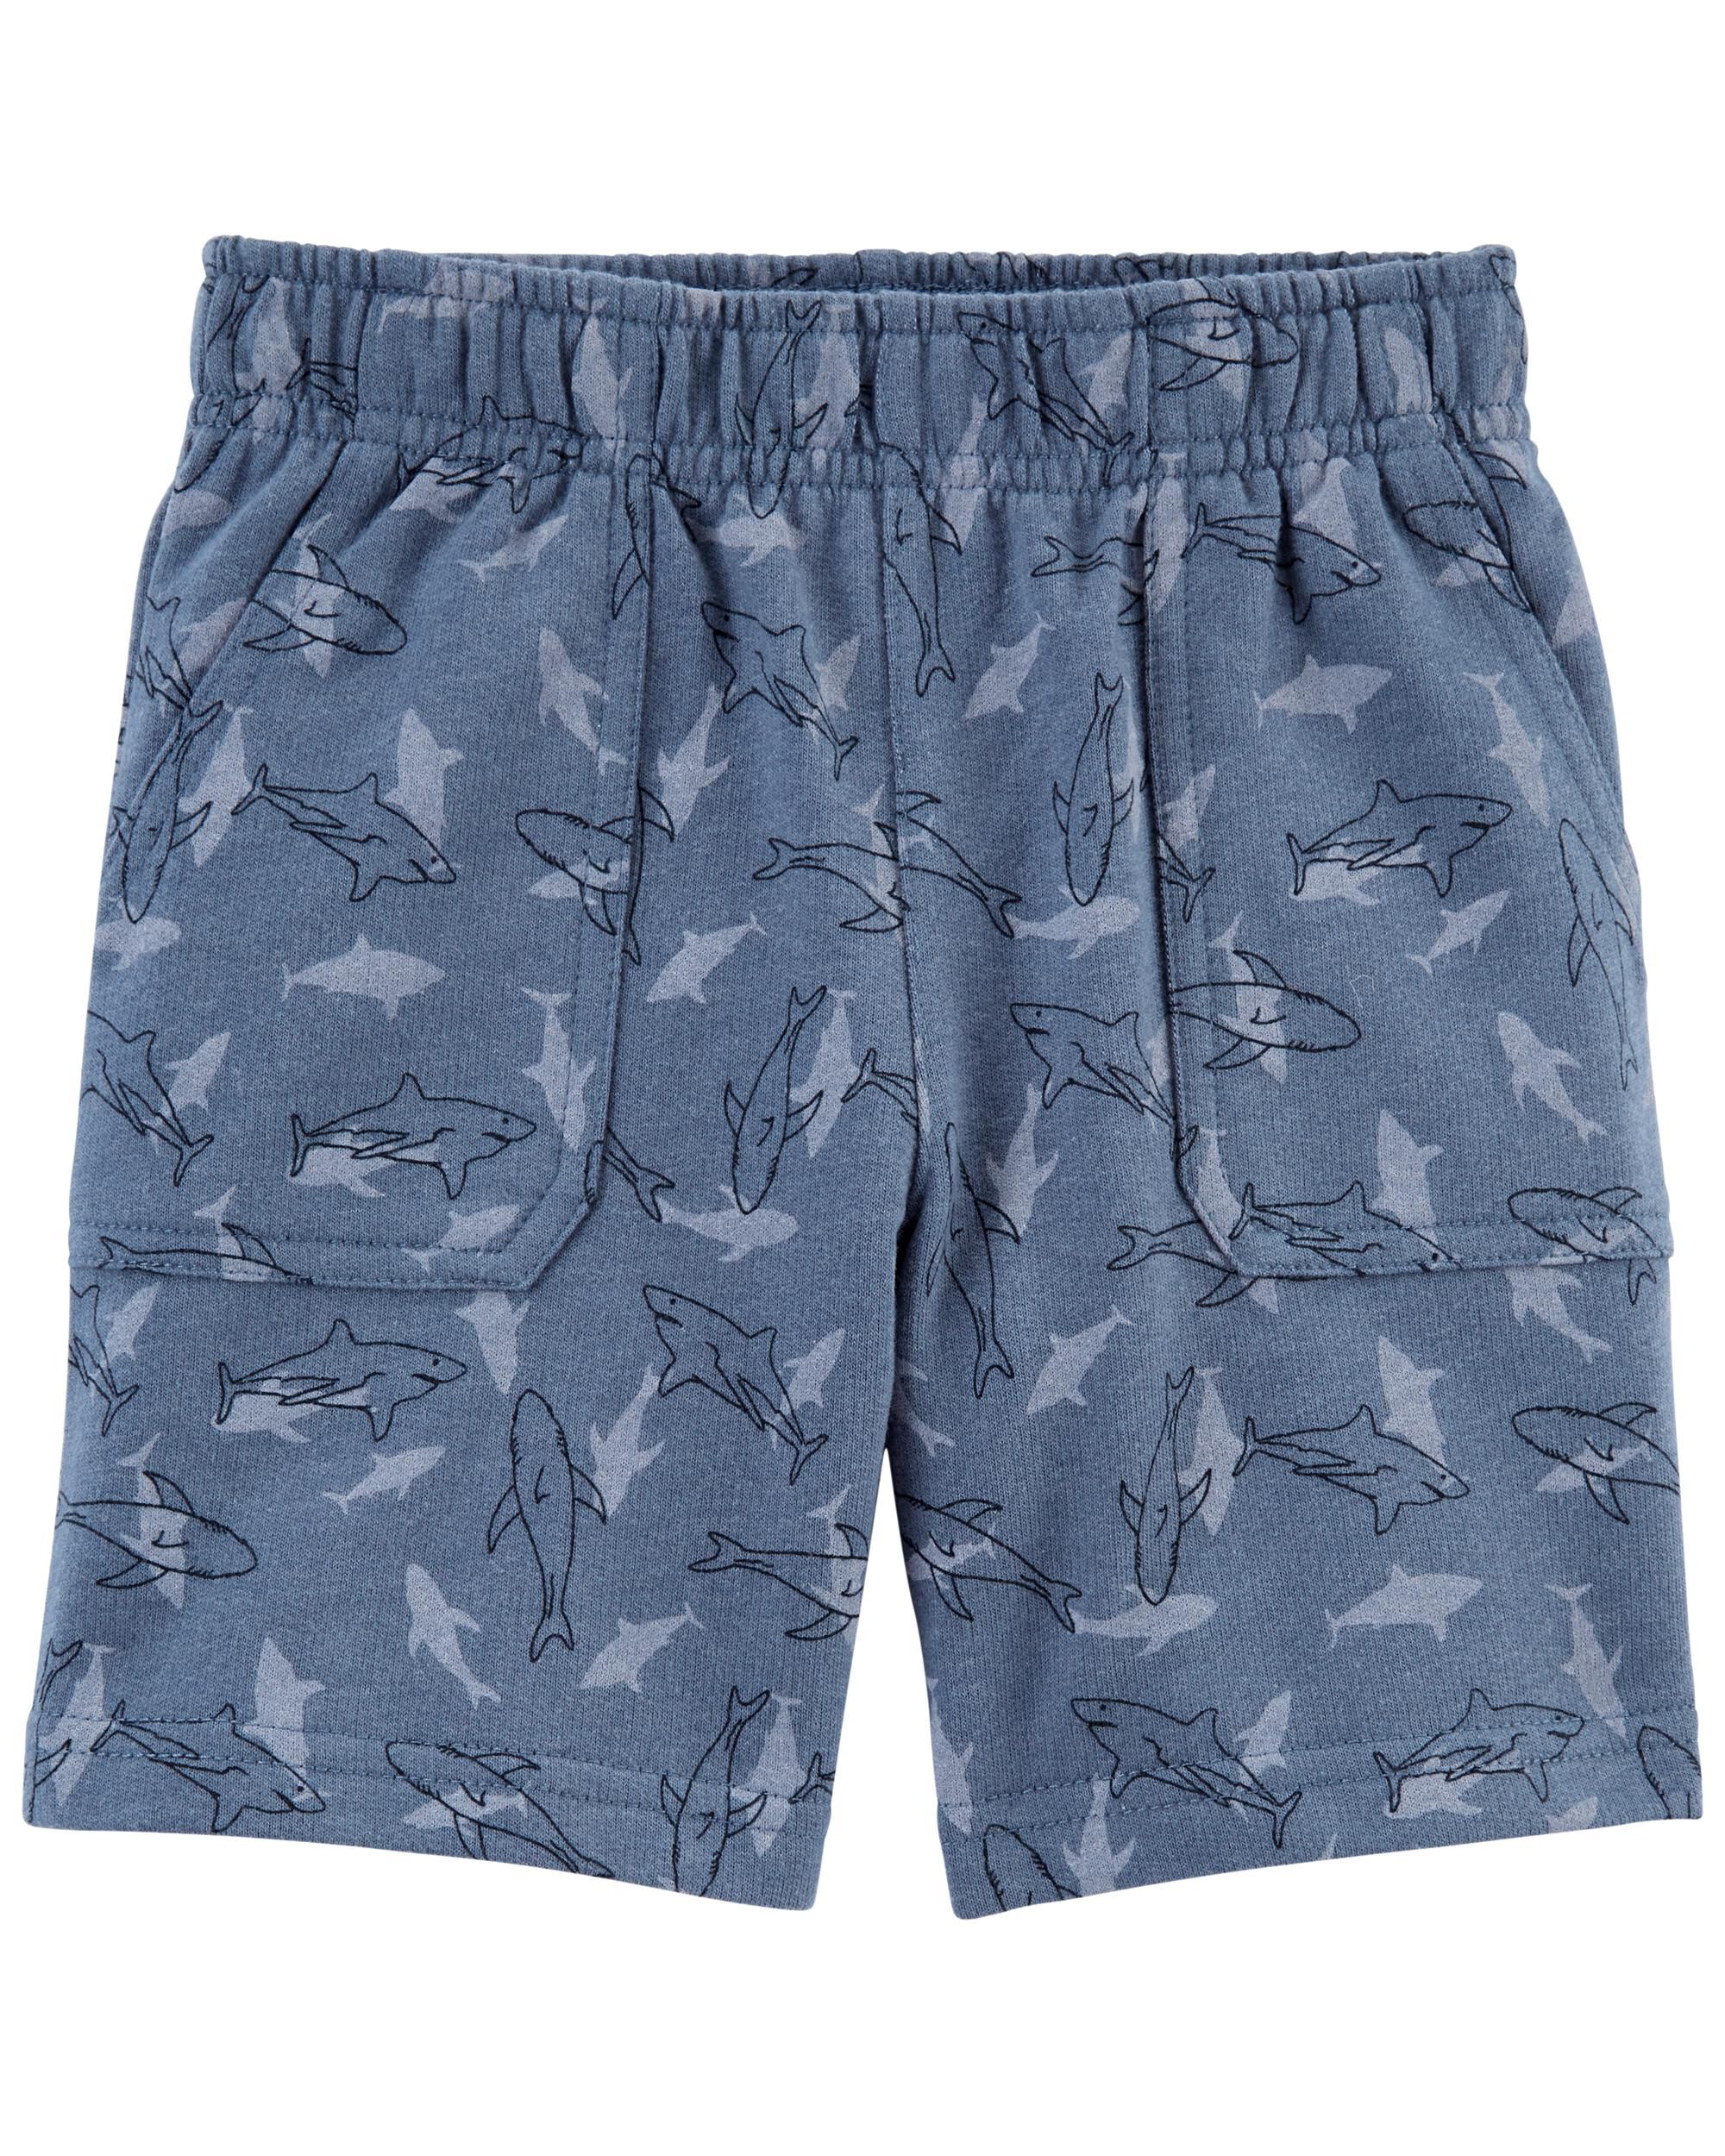  *DOORBUSTER* Sharky French Terry Shorts 